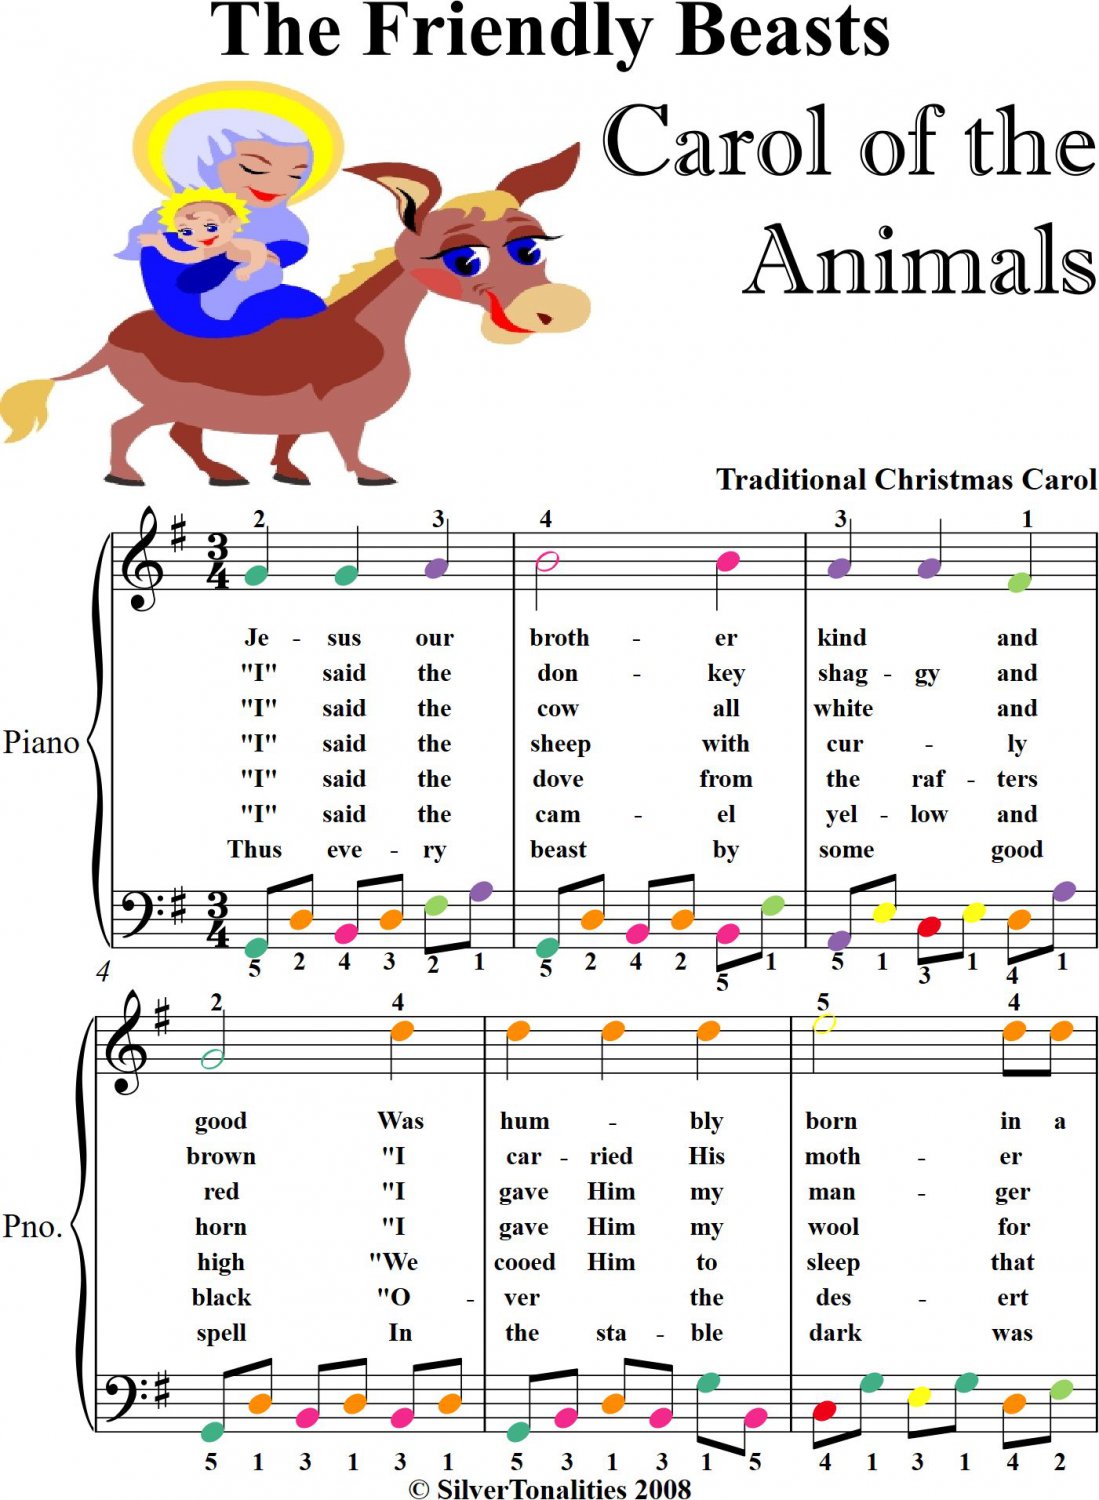 The Friendly Beasts Carol of the Animals Easy Piano Sheet Music with Colored Notes